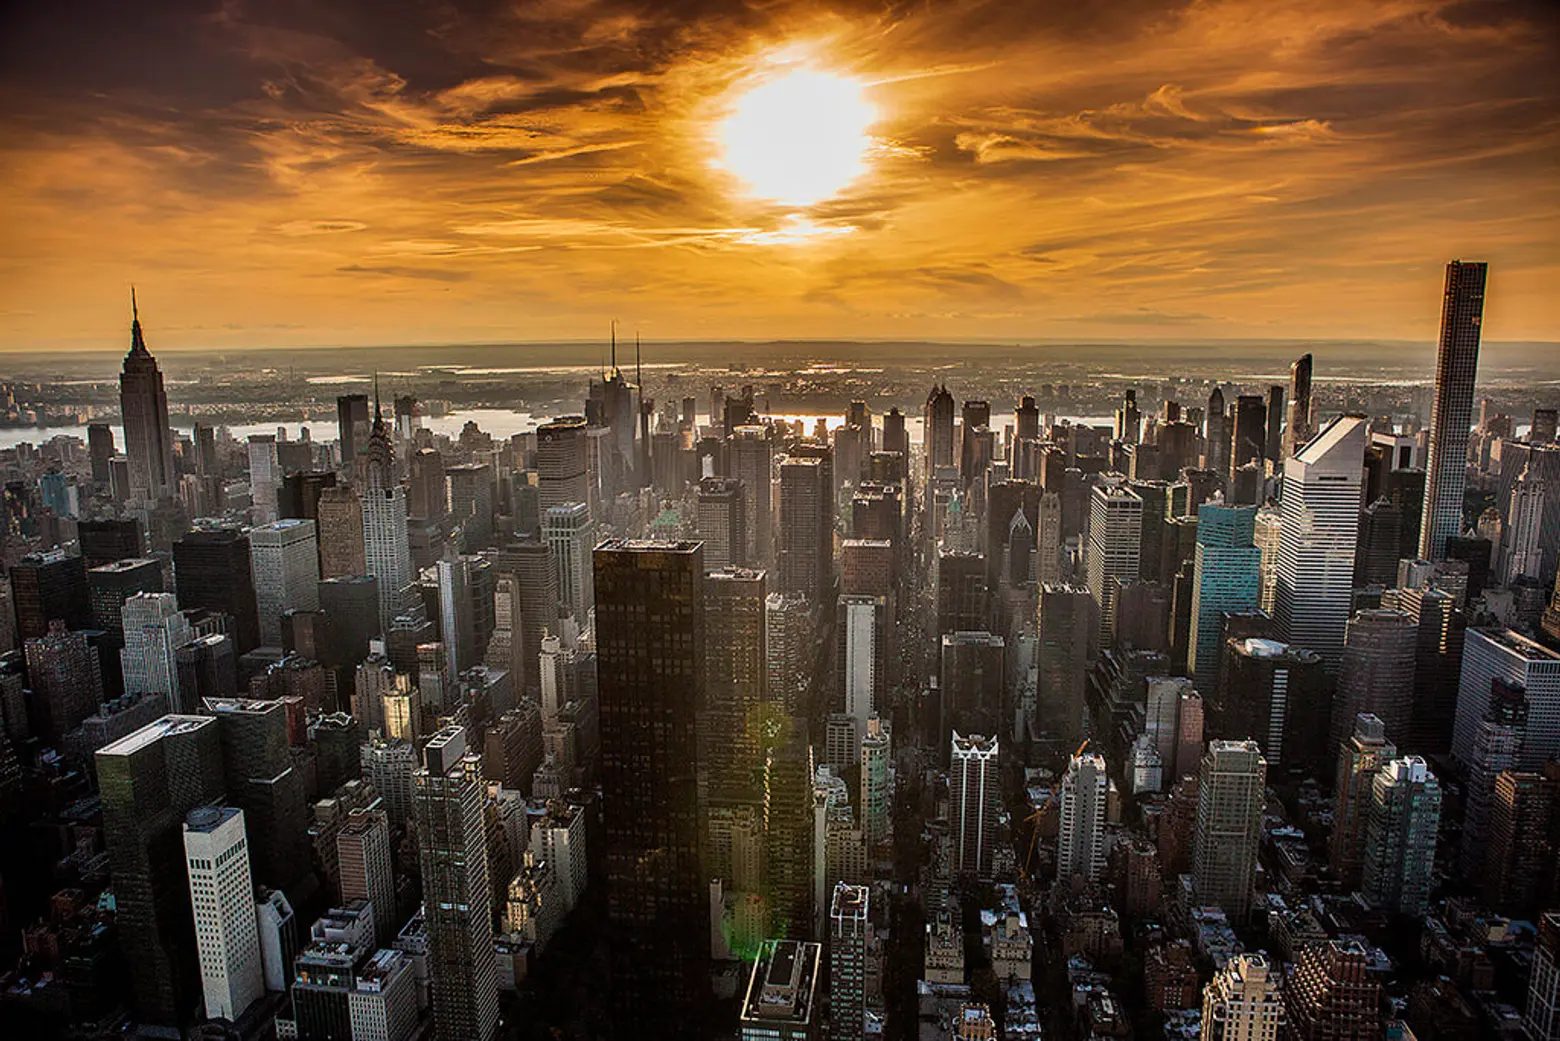 Find out just how much sunlight any building in NYC gets